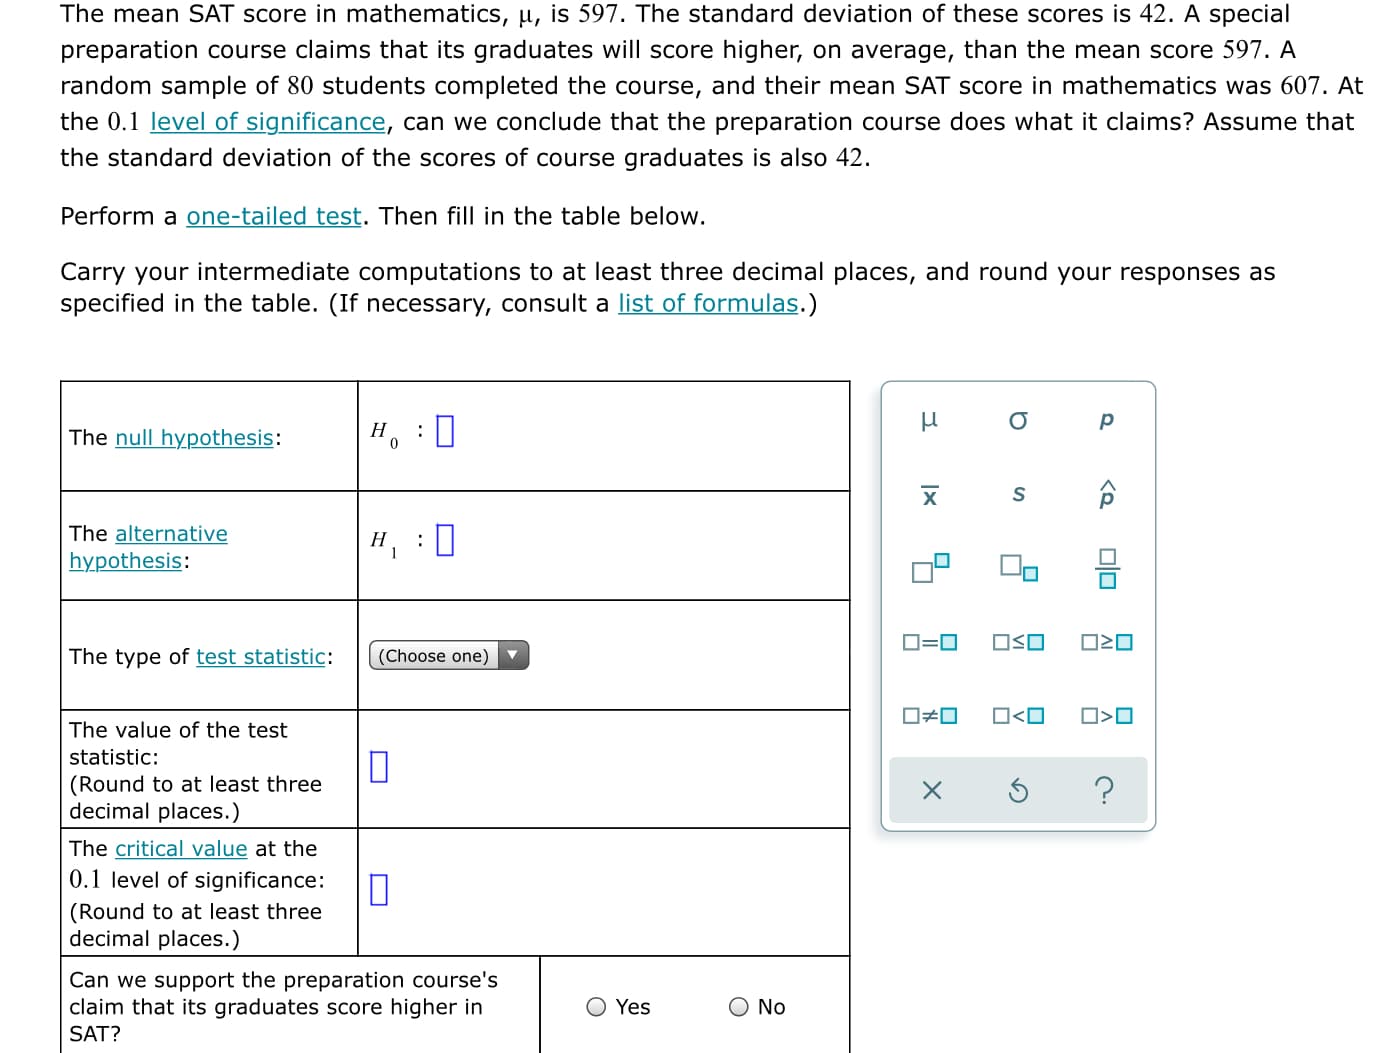 The mean SAT score in mathematics, µ, is 597. The standard deviation of these scores is 42. A special
preparation course claims that its graduates will score higher, on average, than the mean score 597. A
random sample of 80 students completed the course, and their mean SAT score in mathematics was 607. At
the 0.1 level of significance, can we conclude that the preparation course does what it claims? Assume that
the standard deviation of the scores of course graduates is also 42.
Perform a one-tailed test. Then fill in the table below.
Carry your intermediate computations to at least three decimal places, and round your responses as
specified in the table. (If necessary, consult a list of formulas.)
Н
The null hypothesis:
х
The alternative
hypothesis:
ロ=ロ
ロSロ
The type of test statistic:
(Choose one)
ロロ
O<O
O>0
The value of the test
statistic:
(Round to at least three
decimal places.)
The critical value at the
0.1 level of significance:
(Round to at least three
decimal places.)
Can we support the preparation course's
claim that its graduates score higher in
O Yes
O No
SAT?
